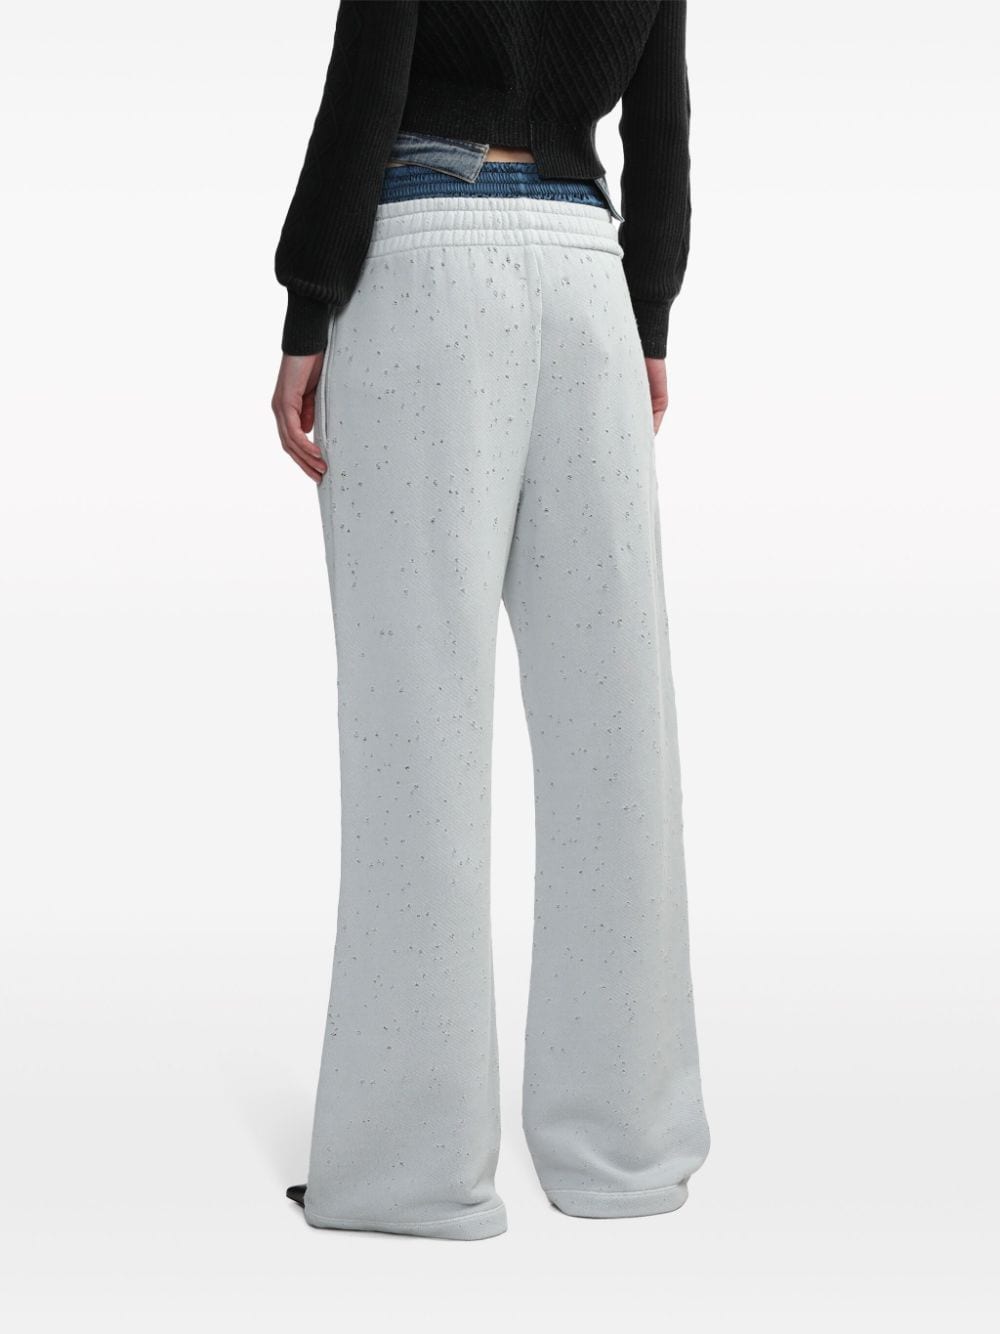 Shop Halfboy Layered Wide-leg Track Pants In Grey